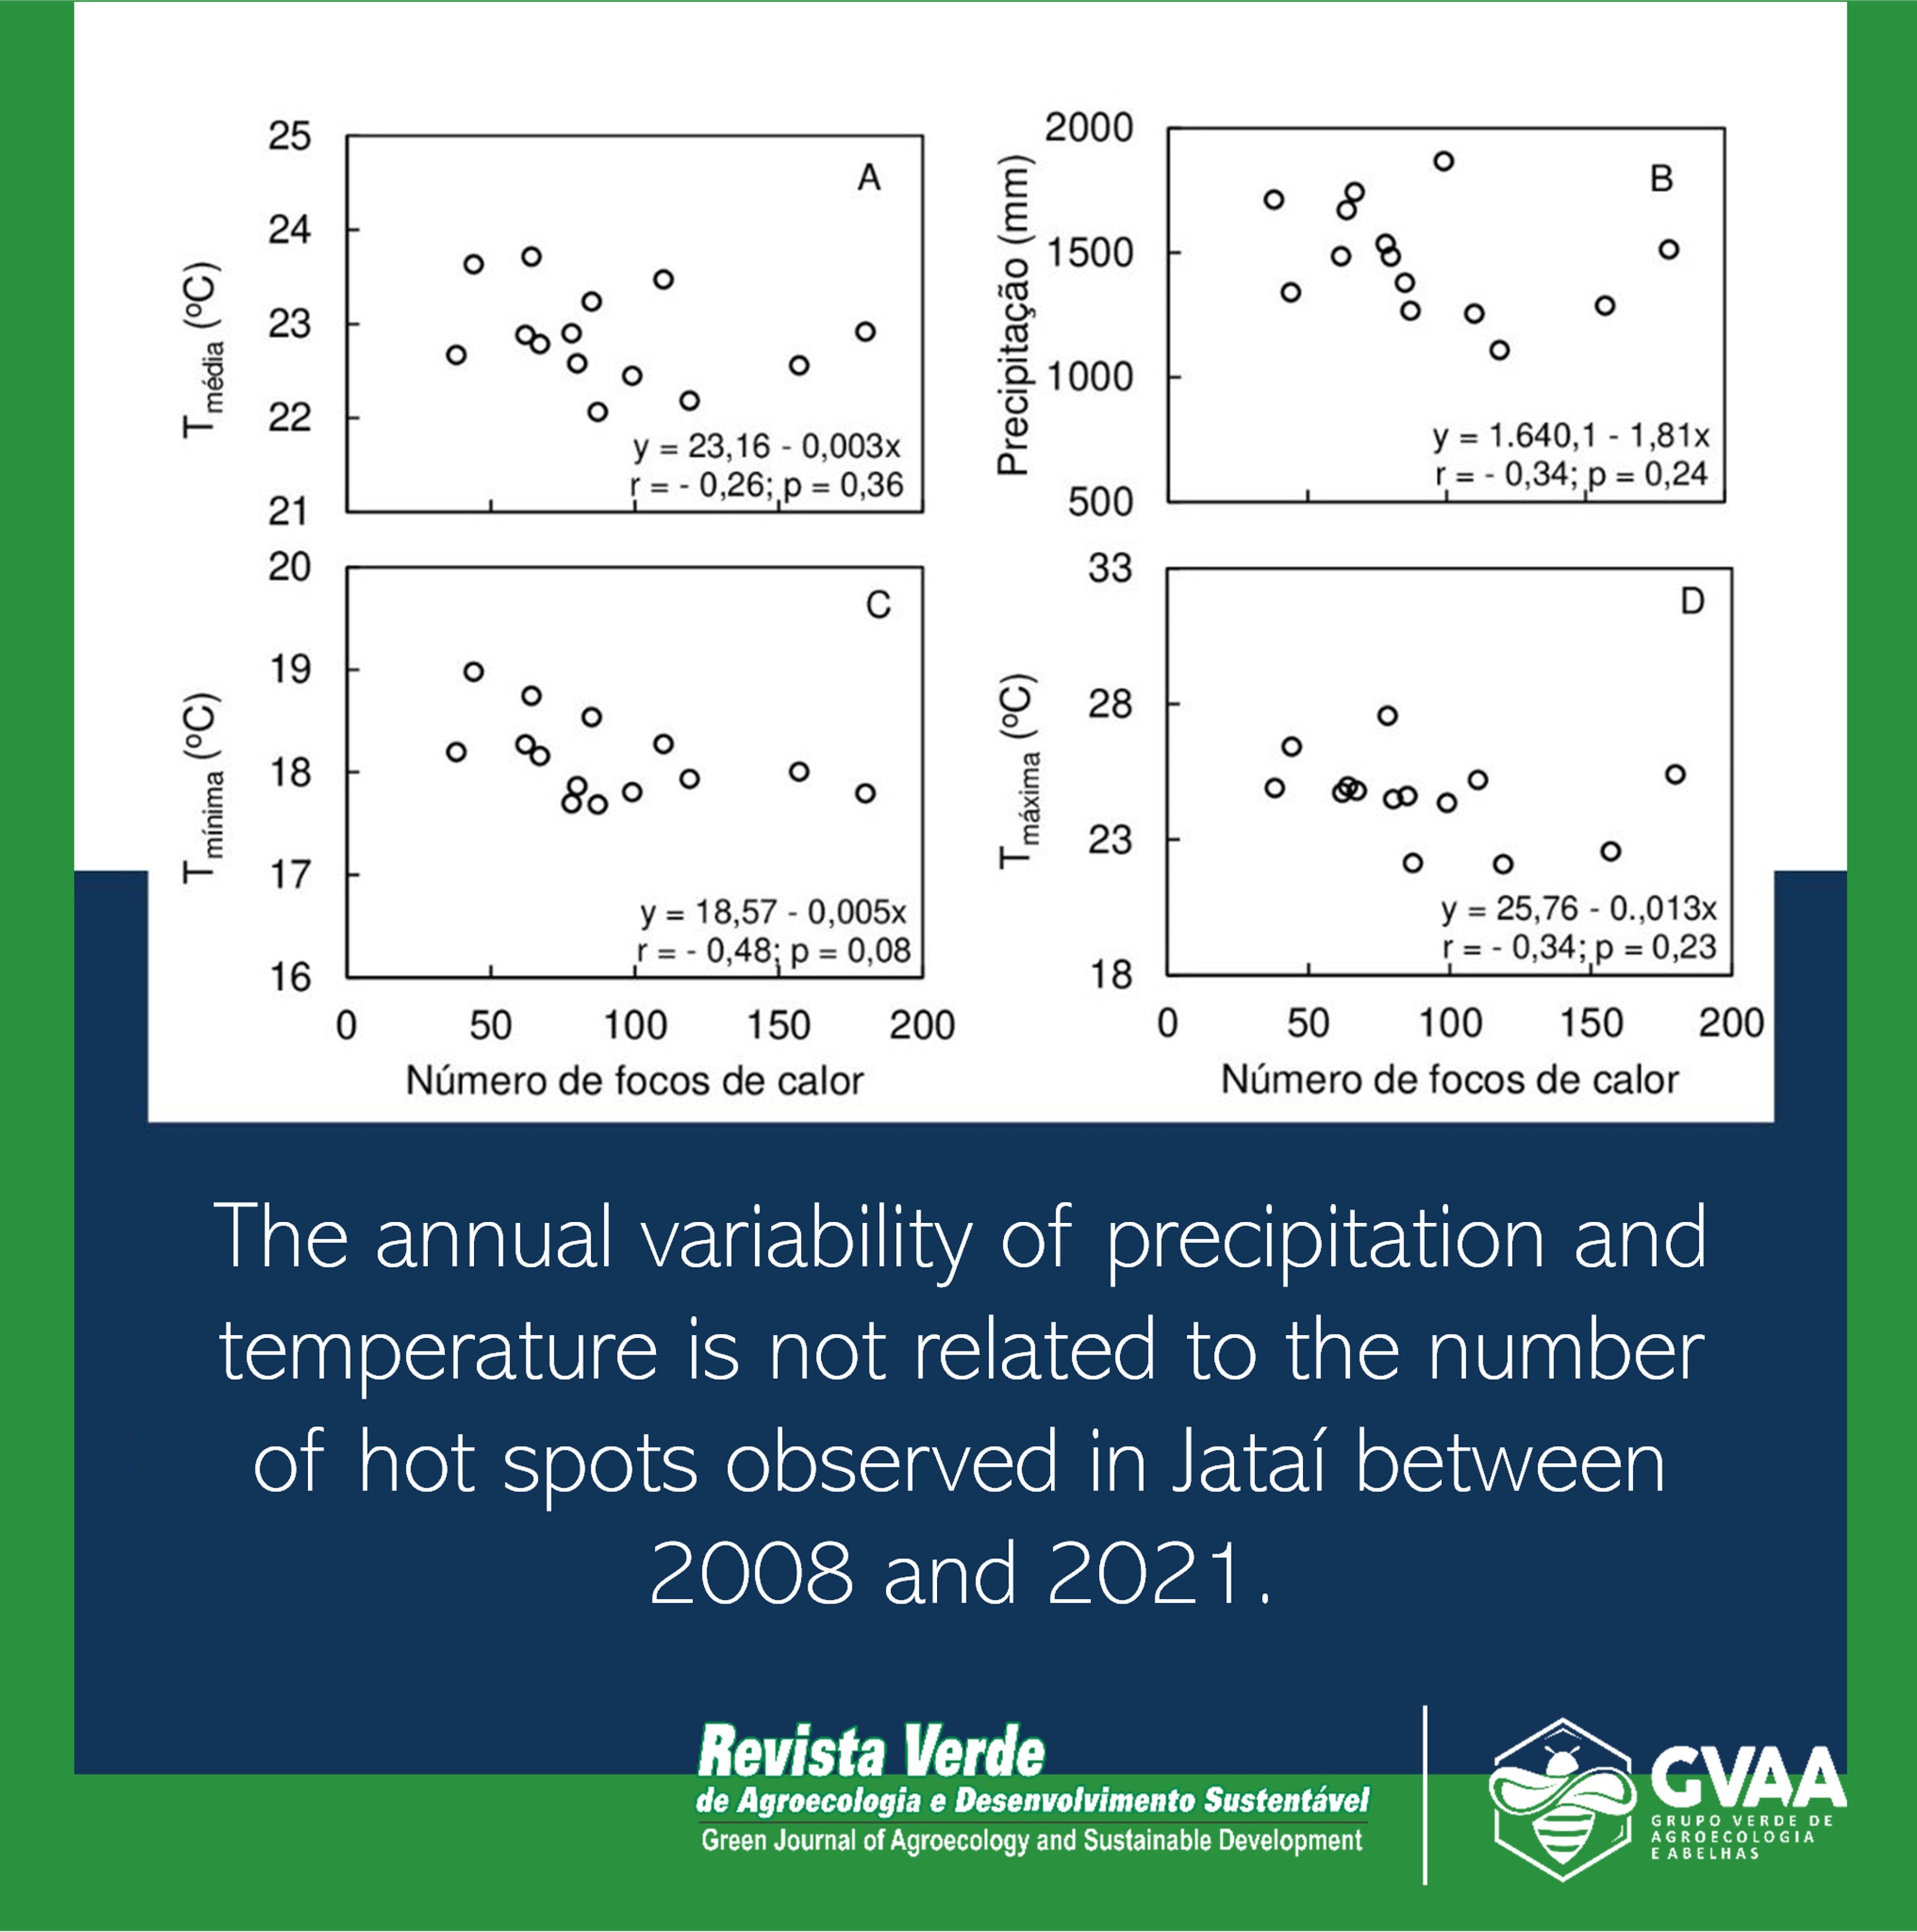 Fire focus and its relationships with rainfall and air temperature in Jataí, Goiás, Brazil